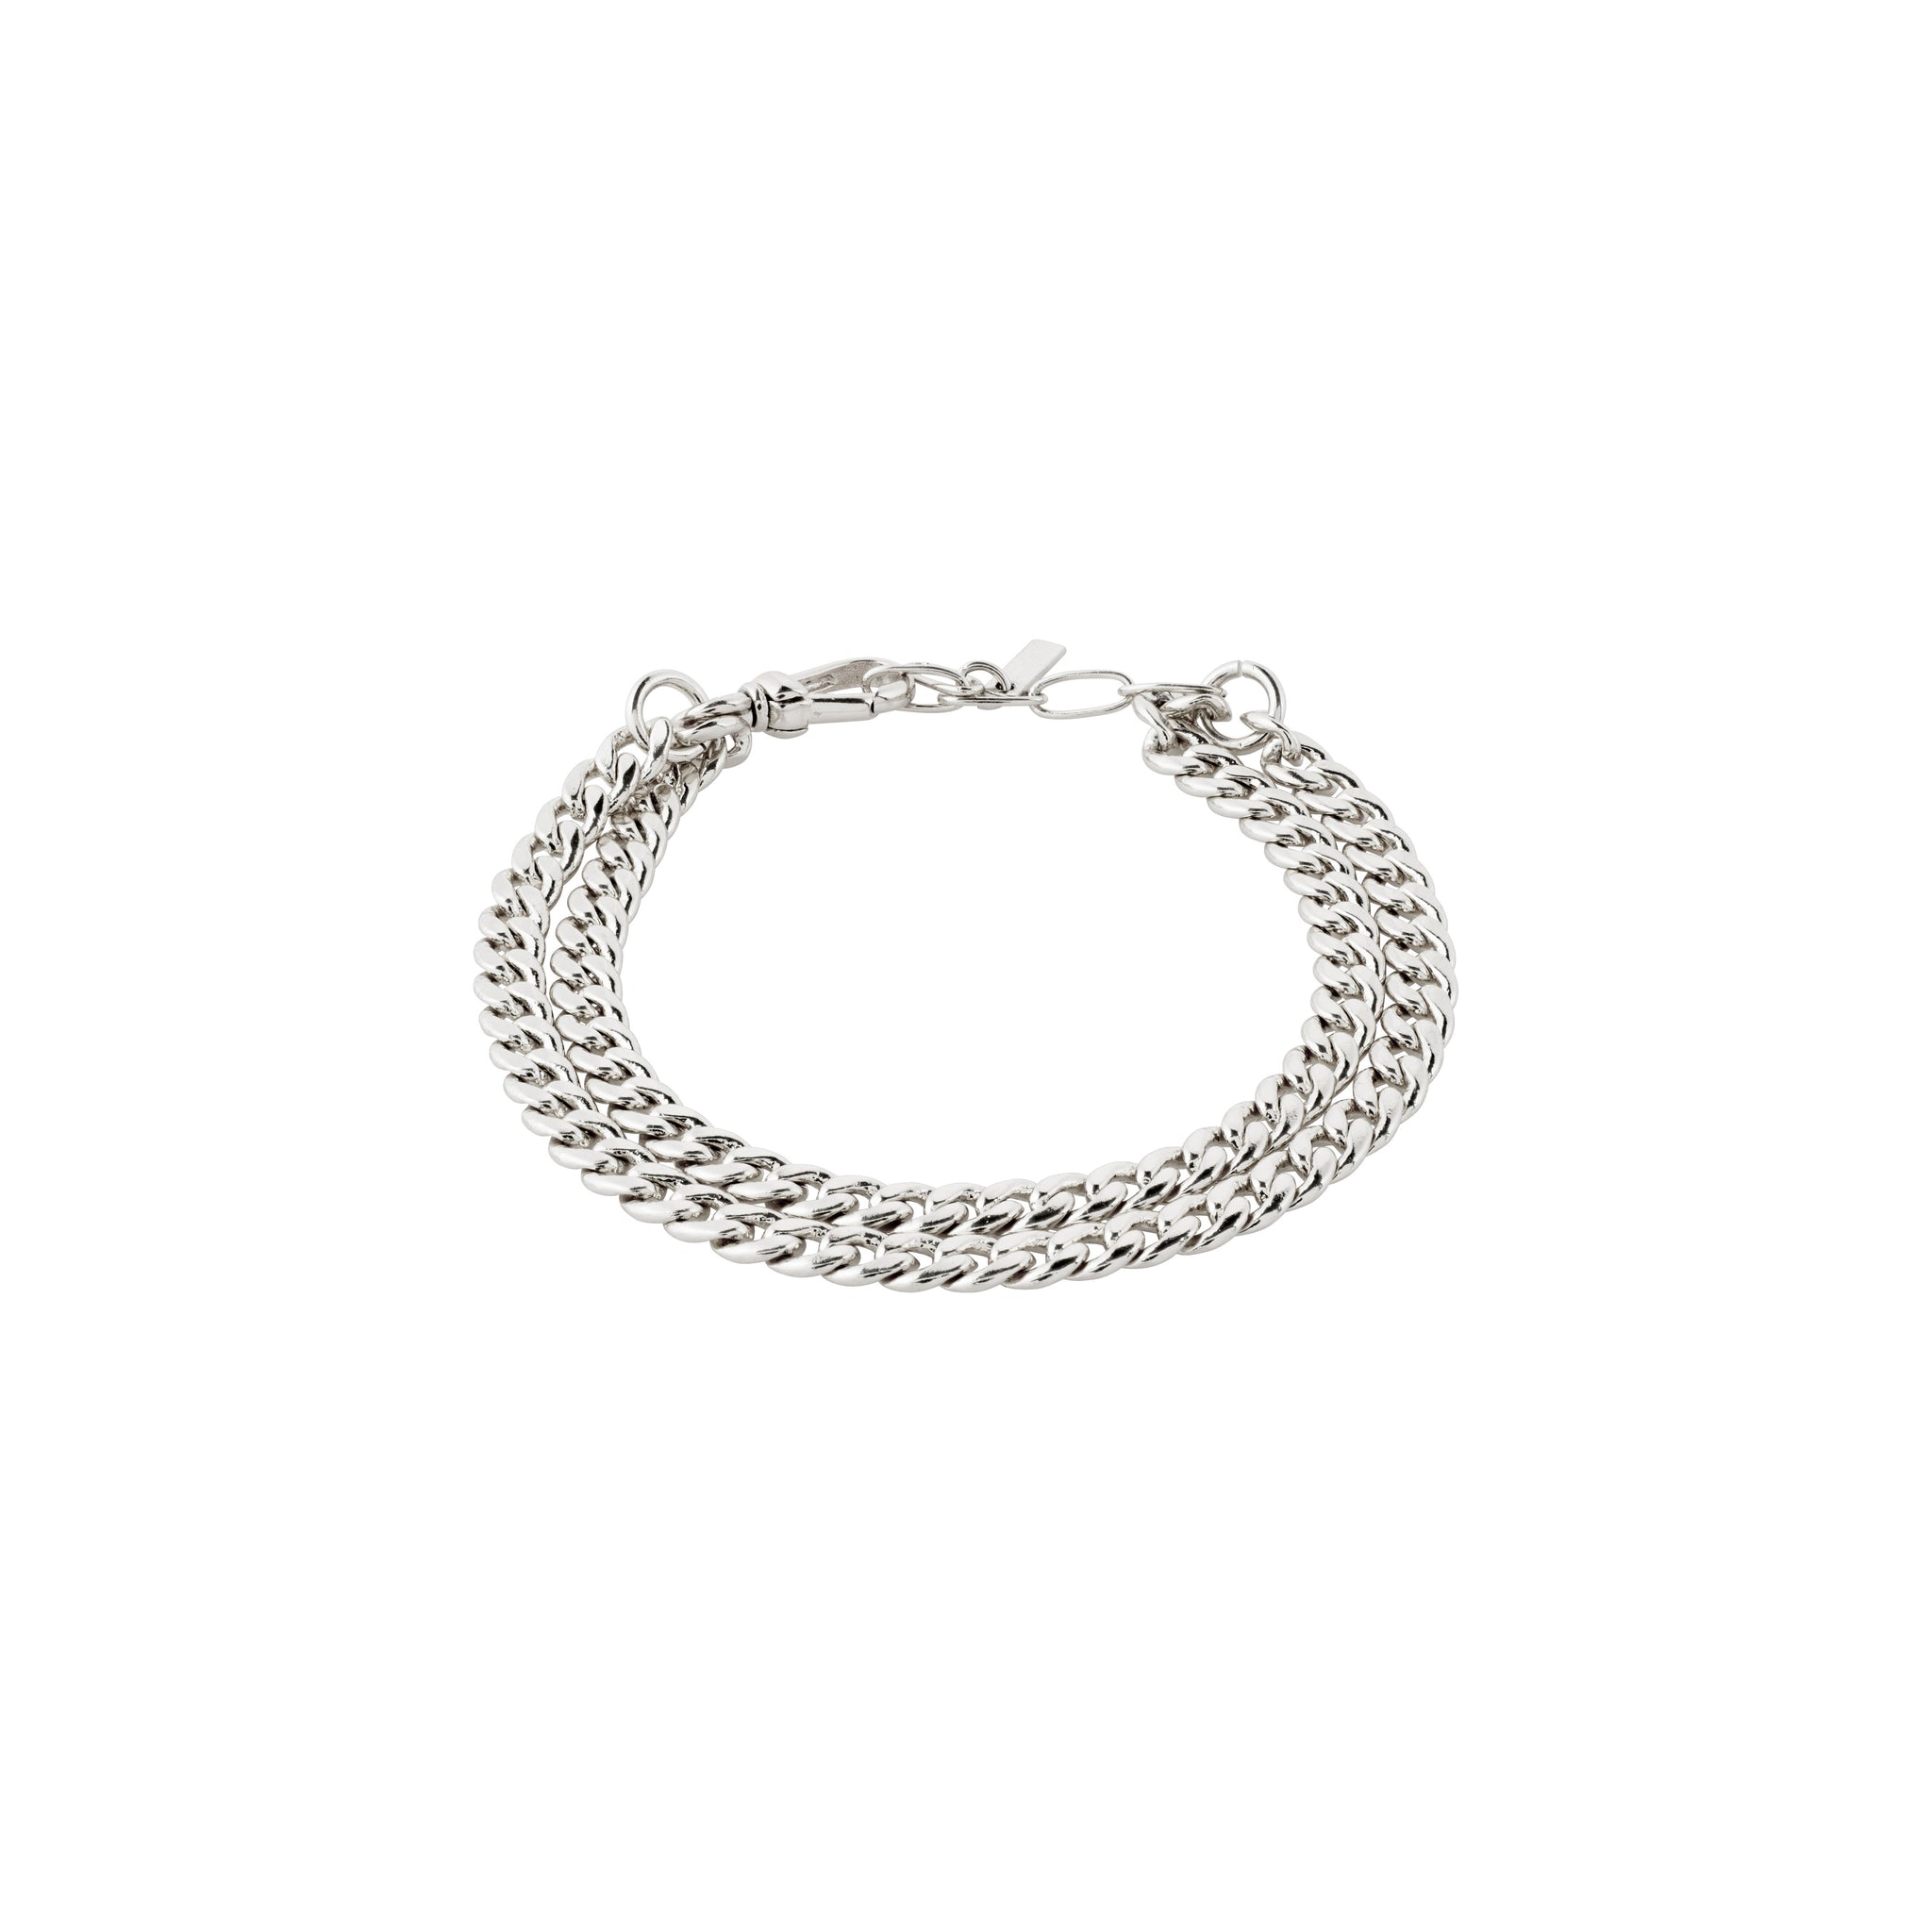 Blossom 2-in-1 Bracelet - Silver Plated